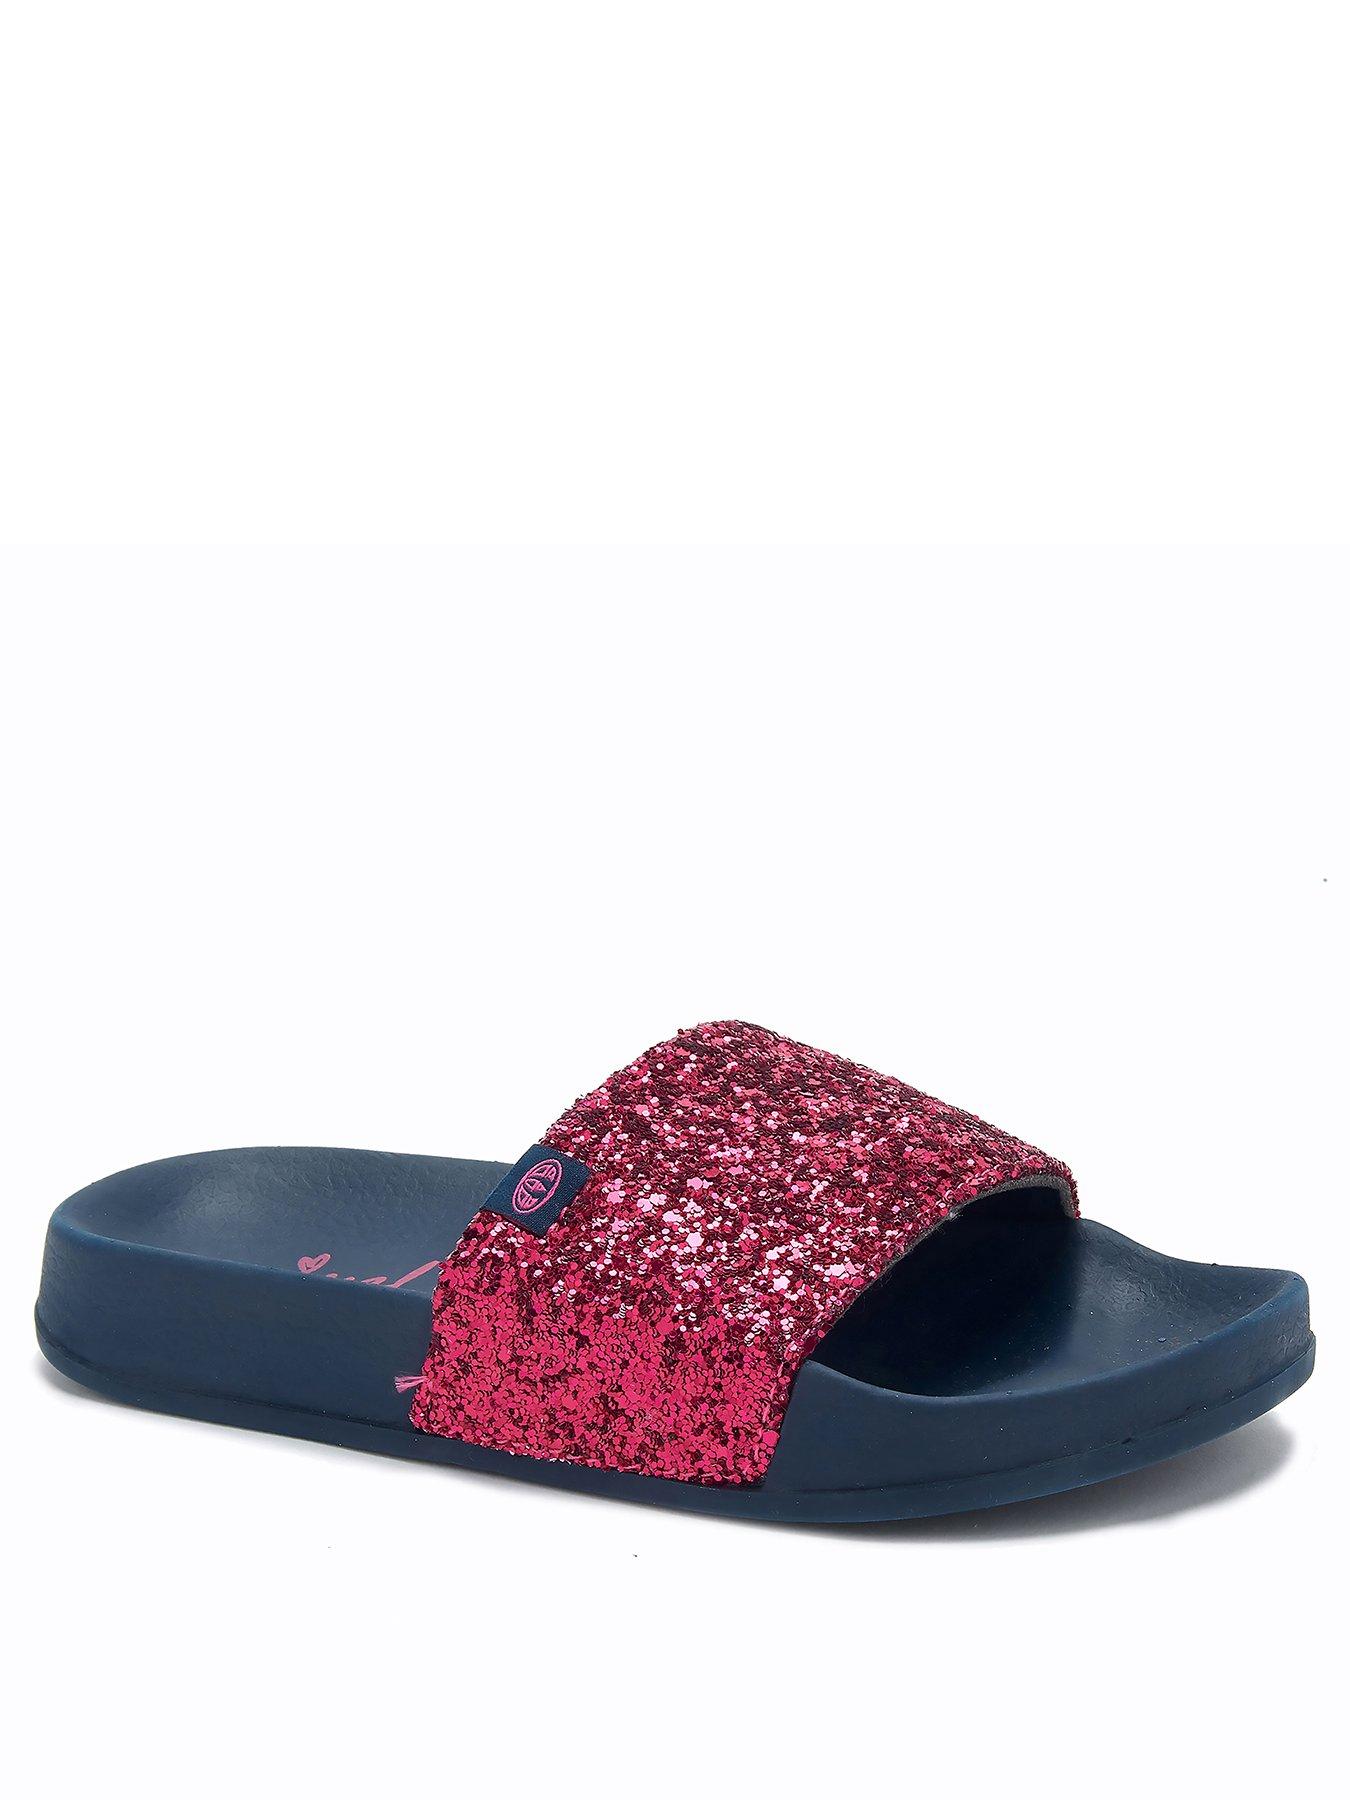 girls sliders size 2 cheapest 425f2 a05a5